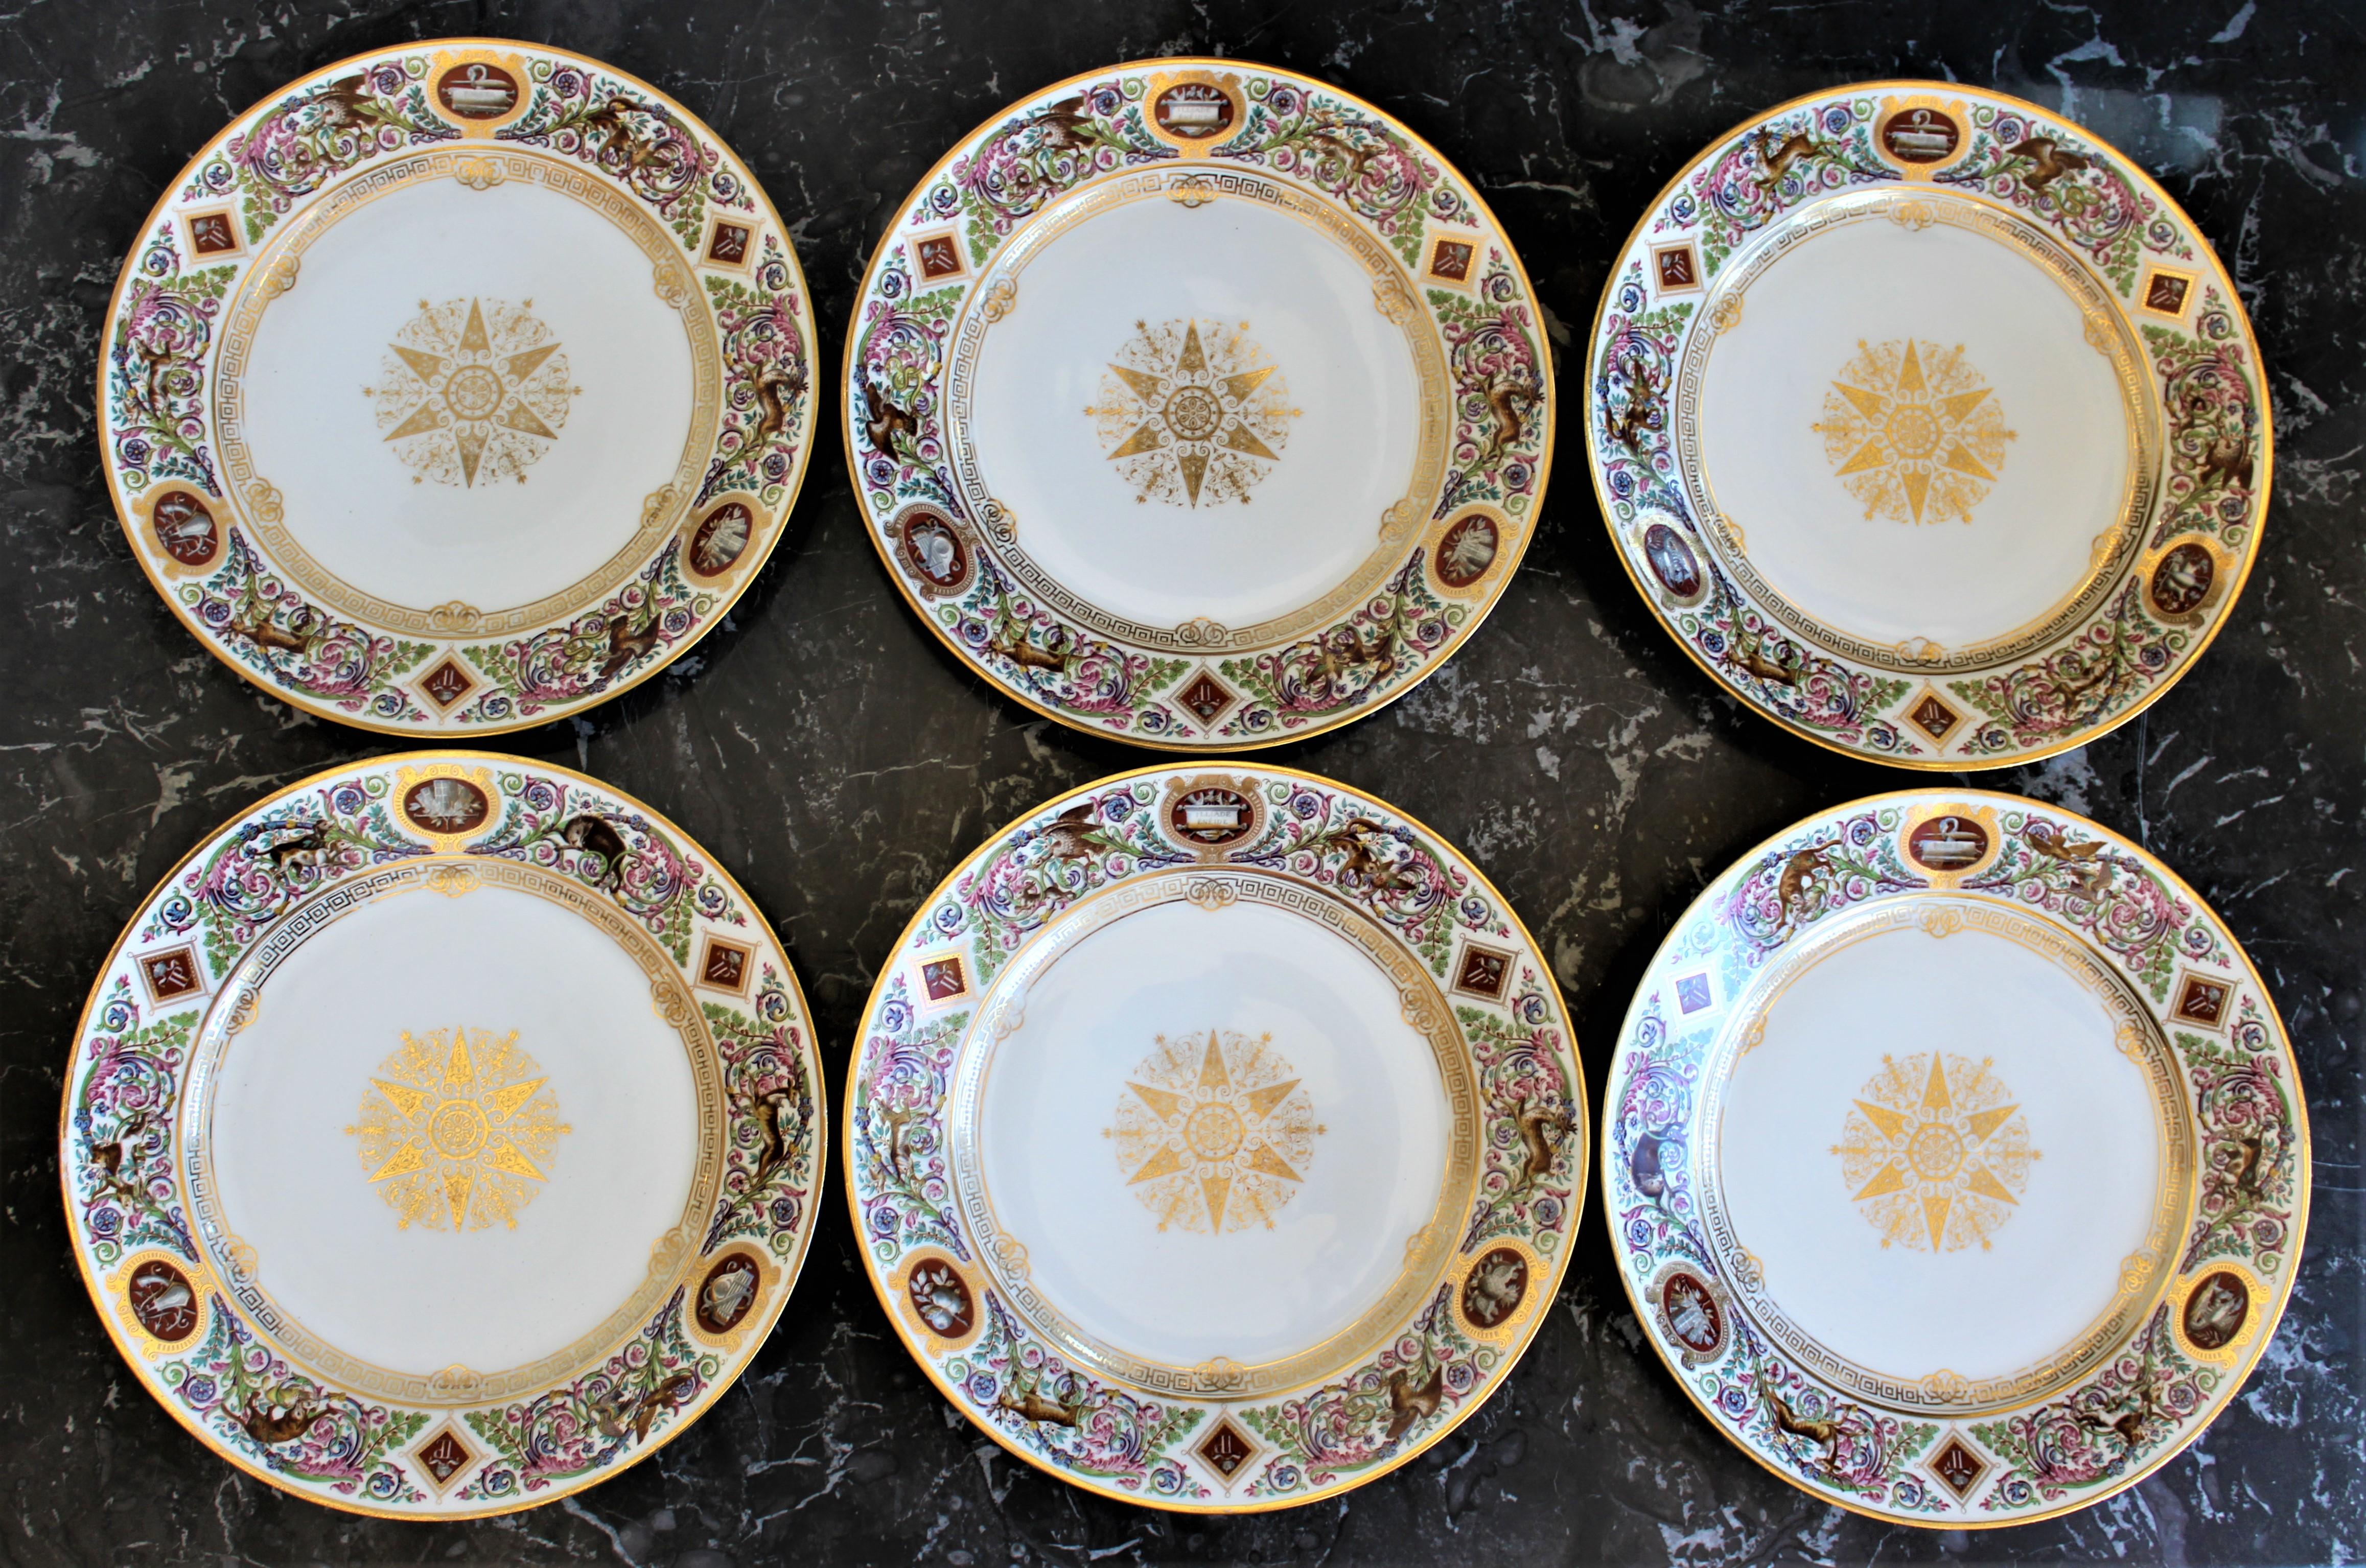 Dating from the mid-19th century and having their origins in France are a set of six signed Sevres Louis Philippe hunting at Chateau de Fountainbleu porcelain dinner or cabinet plates. The plates are done in a Neoclassical style depicting animals